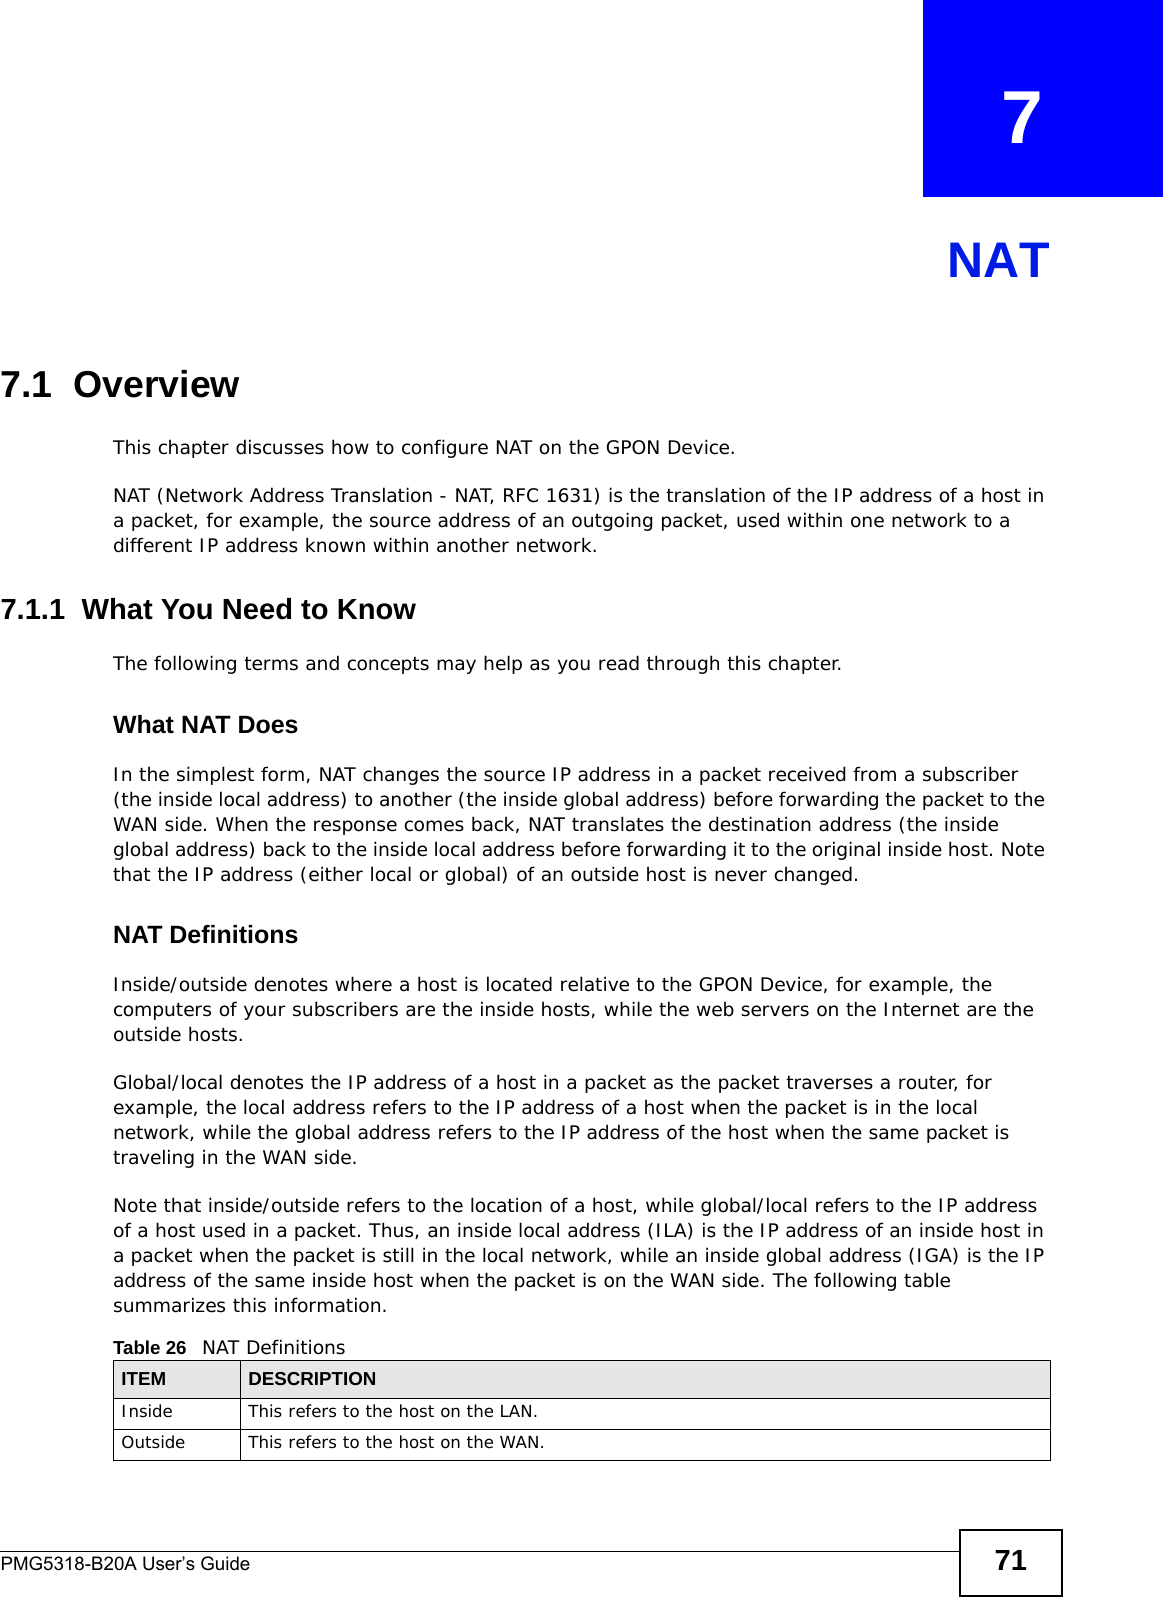 PMG5318-B20A User’s Guide 71CHAPTER   7NAT7.1  Overview This chapter discusses how to configure NAT on the GPON Device.NAT (Network Address Translation - NAT, RFC 1631) is the translation of the IP address of a host in a packet, for example, the source address of an outgoing packet, used within one network to a different IP address known within another network. 7.1.1  What You Need to KnowThe following terms and concepts may help as you read through this chapter.What NAT DoesIn the simplest form, NAT changes the source IP address in a packet received from a subscriber (the inside local address) to another (the inside global address) before forwarding the packet to the WAN side. When the response comes back, NAT translates the destination address (the inside global address) back to the inside local address before forwarding it to the original inside host. Note that the IP address (either local or global) of an outside host is never changed.NAT DefinitionsInside/outside denotes where a host is located relative to the GPON Device, for example, the computers of your subscribers are the inside hosts, while the web servers on the Internet are the outside hosts. Global/local denotes the IP address of a host in a packet as the packet traverses a router, for example, the local address refers to the IP address of a host when the packet is in the local network, while the global address refers to the IP address of the host when the same packet is traveling in the WAN side. Note that inside/outside refers to the location of a host, while global/local refers to the IP address of a host used in a packet. Thus, an inside local address (ILA) is the IP address of an inside host in a packet when the packet is still in the local network, while an inside global address (IGA) is the IP address of the same inside host when the packet is on the WAN side. The following table summarizes this information.Table 26   NAT DefinitionsITEM DESCRIPTIONInside This refers to the host on the LAN.Outside This refers to the host on the WAN.